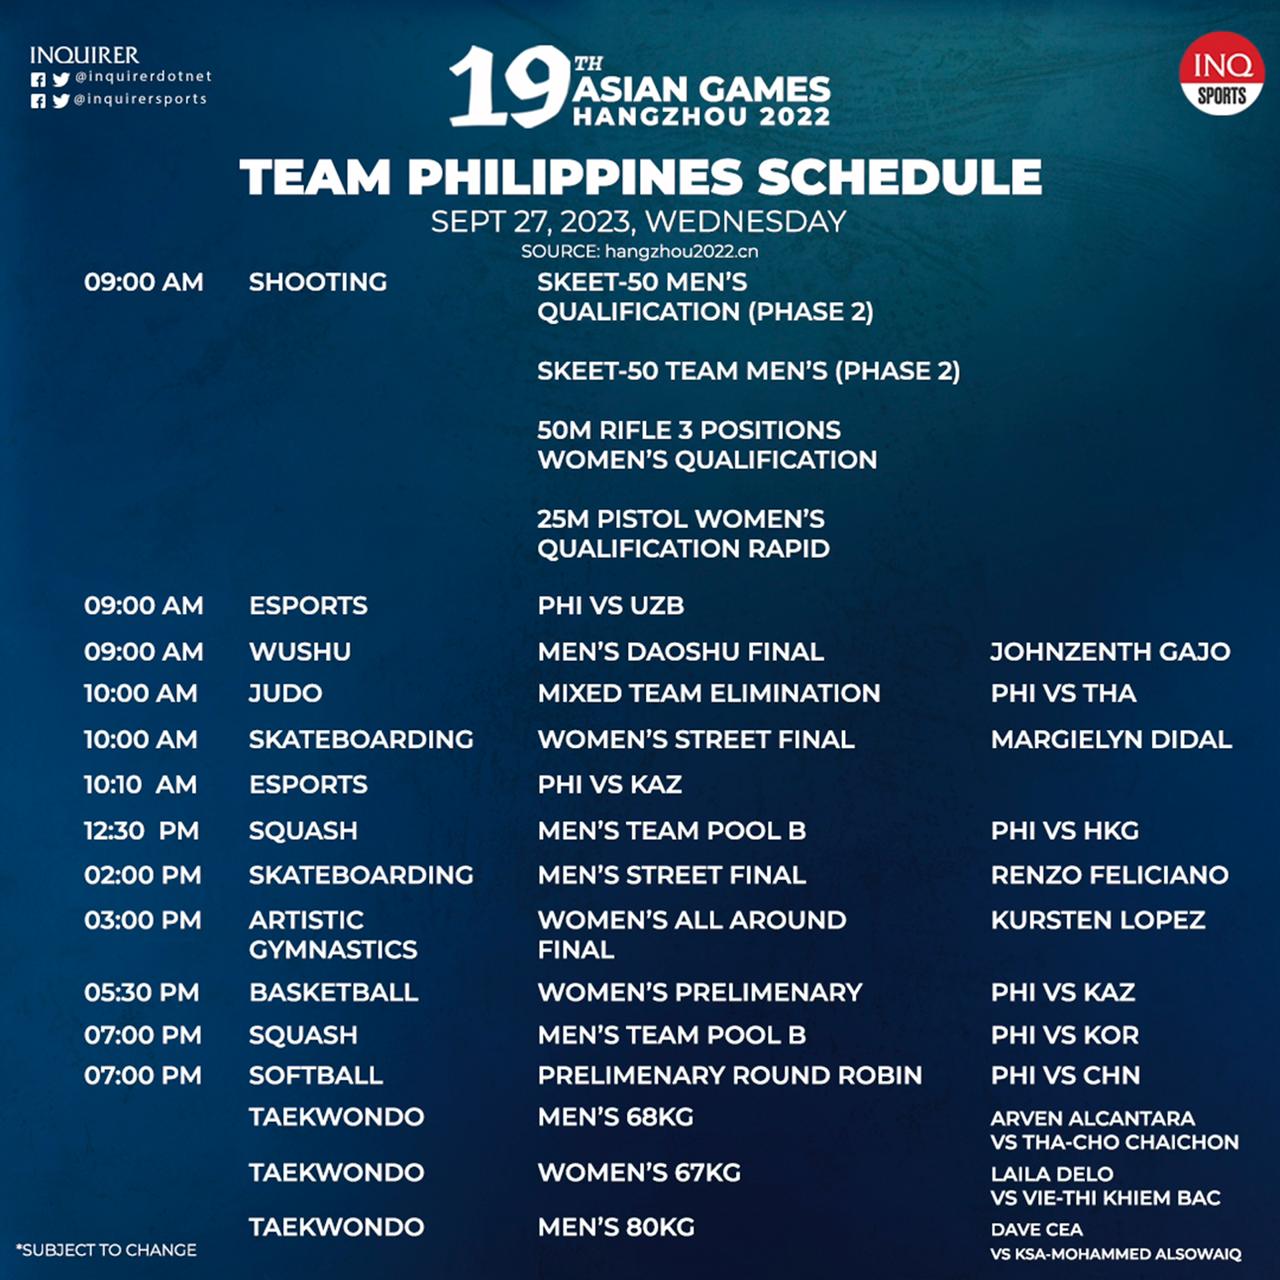 TEAM PHILIPPINES SEPTEMBER 27 SCHEDULE OF EVENTS